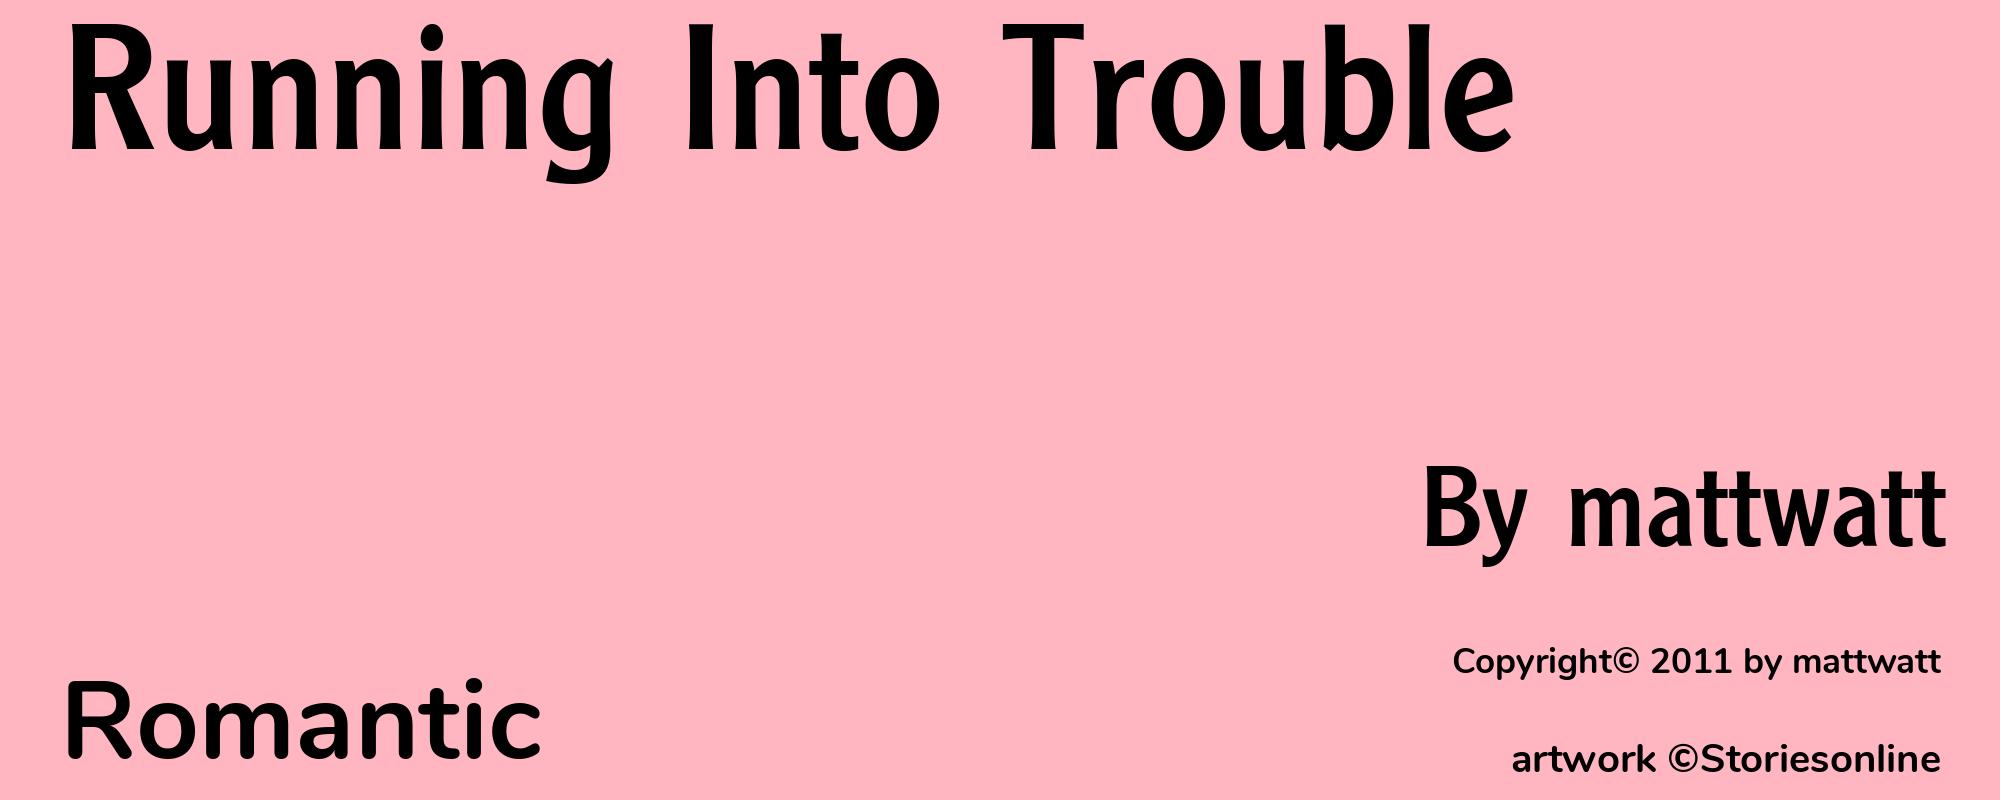 Running Into Trouble - Cover